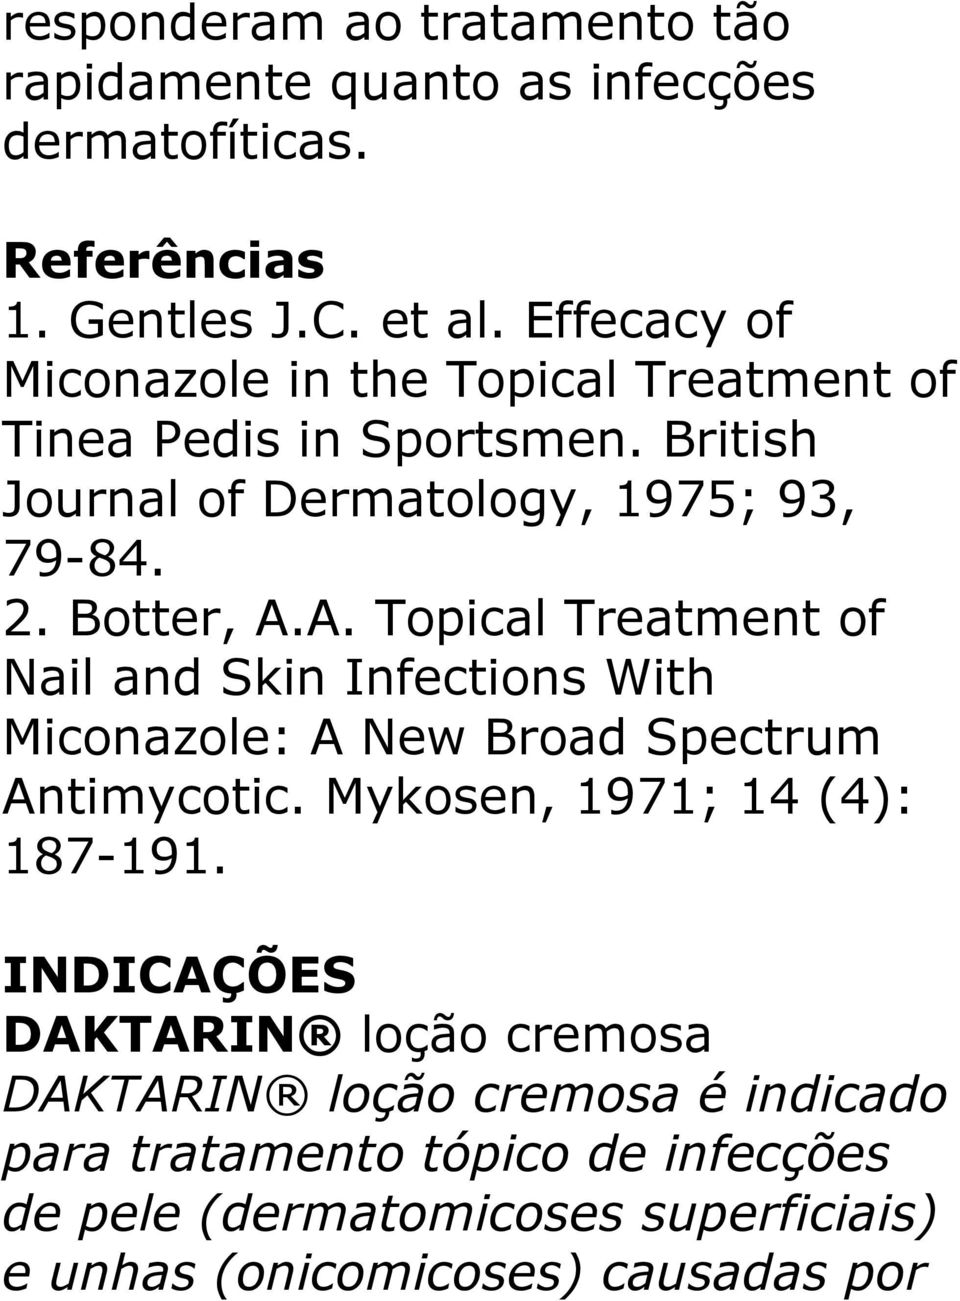 A. Topical Treatment of Nail and Skin Infections With Miconazole: A New Broad Spectrum Antimycotic. Mykosen, 1971; 14 (4): 187-191.